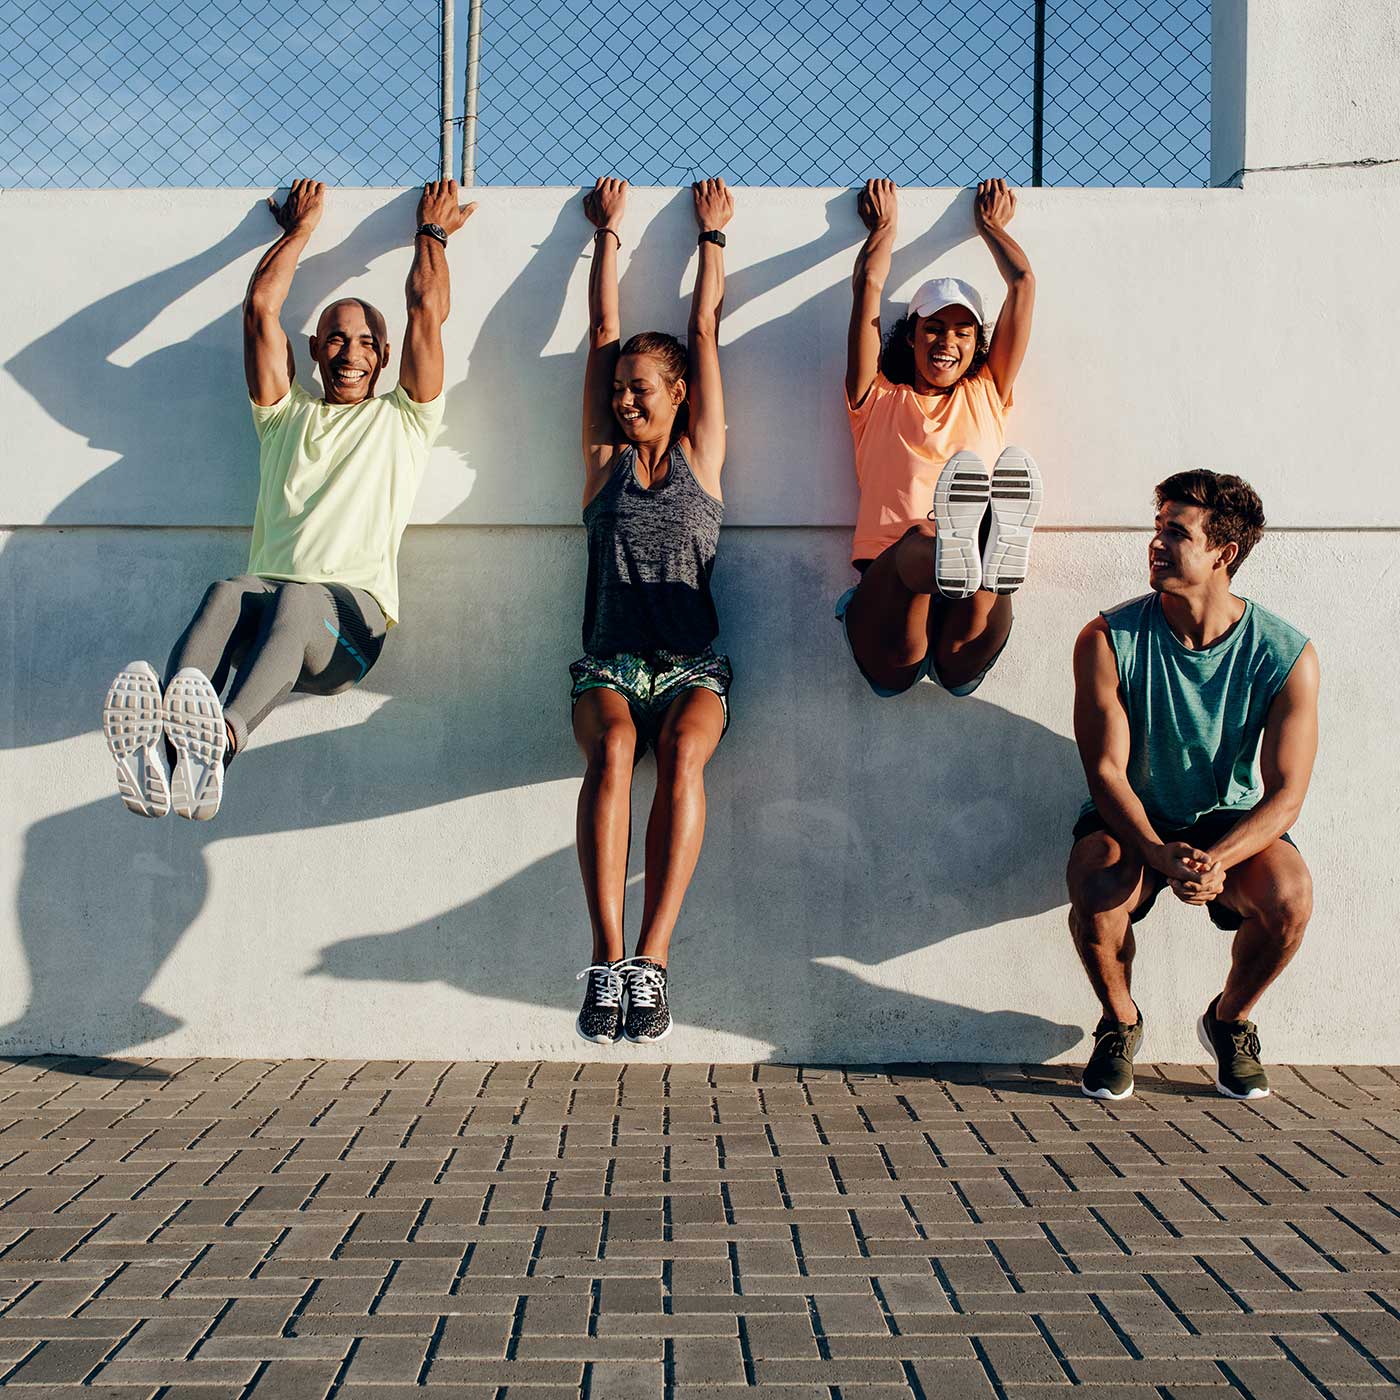 Group of people having fun during workout session outdoors. Friends hanging to a wall and stretching after running session.